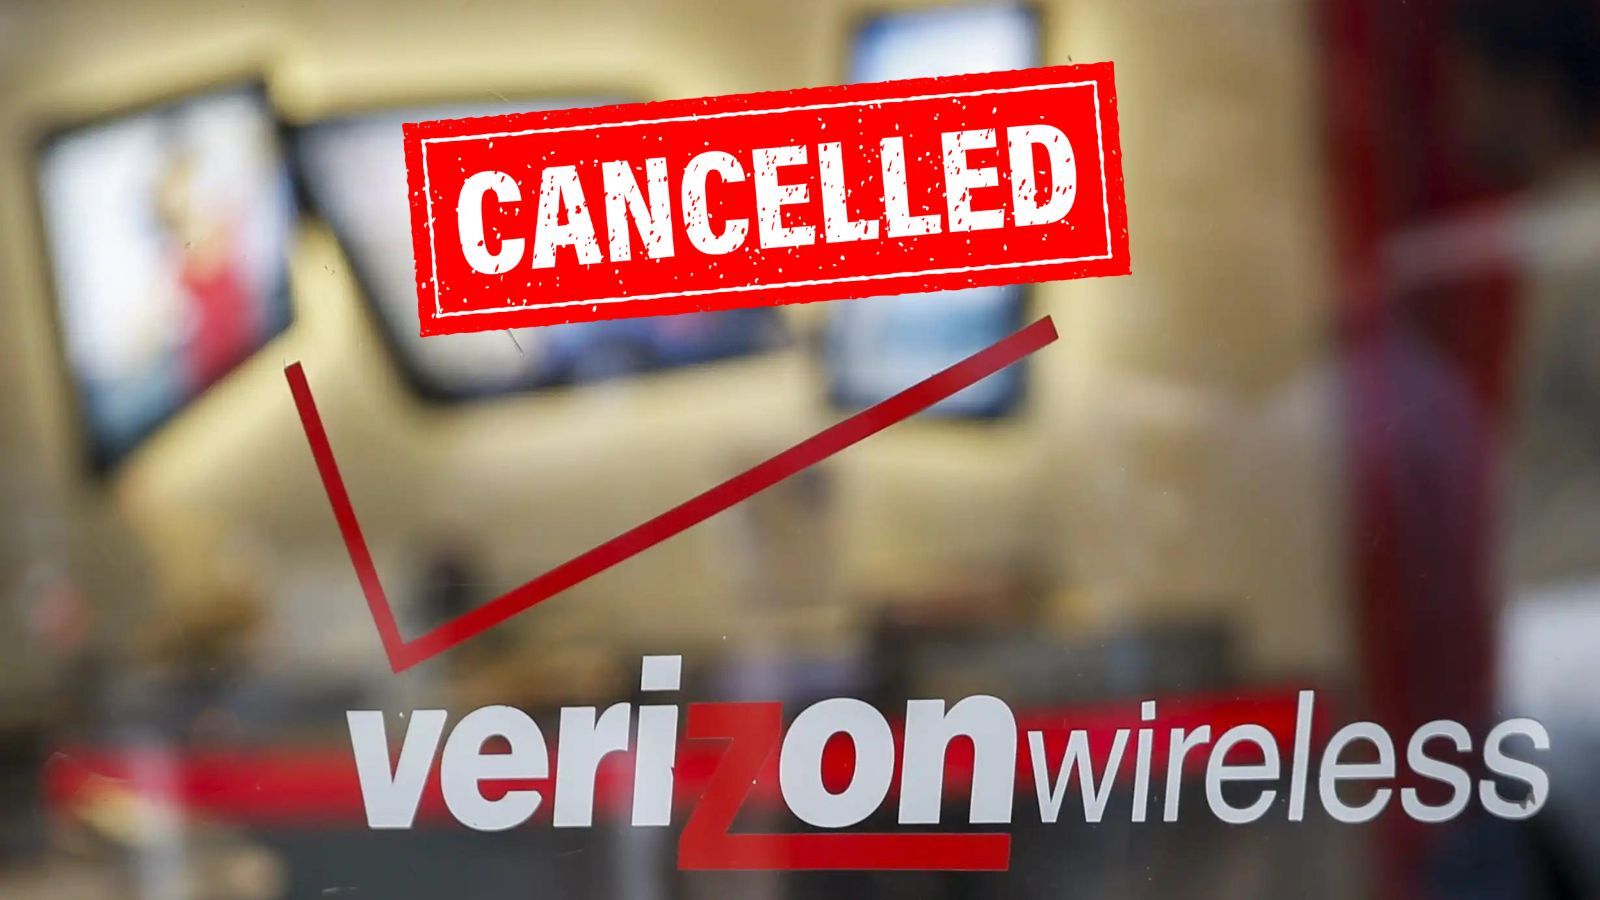 How to Cancel Verizon Wireless? (Detailed Steps and Precautions)